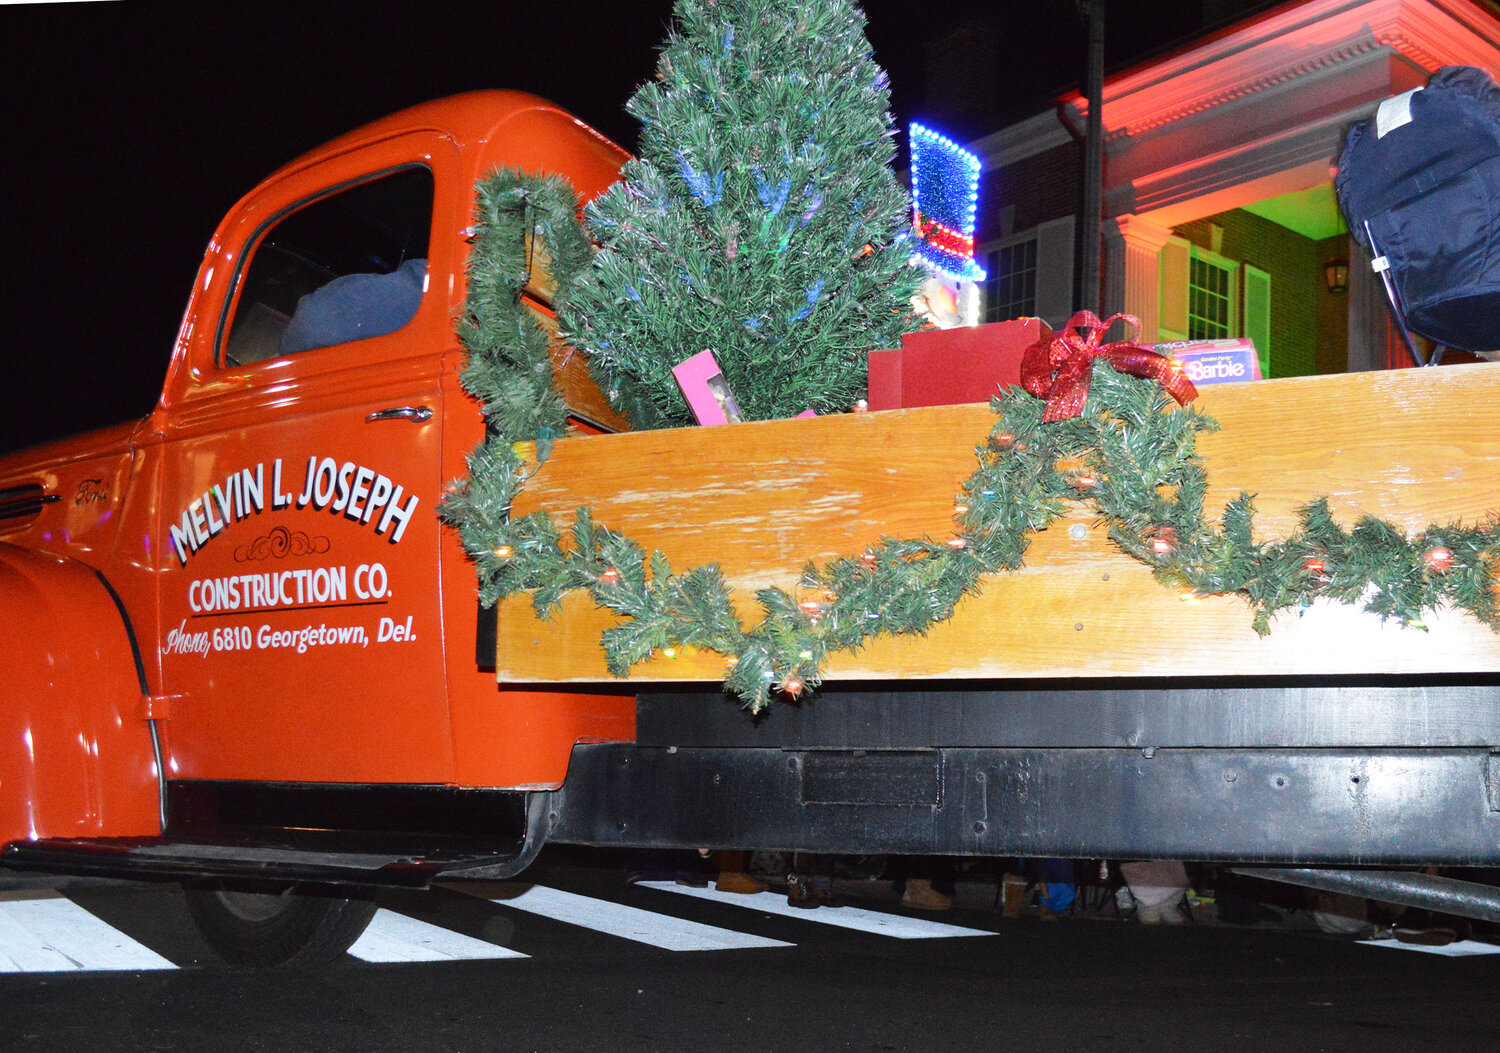 The Melvin L. Joseph Construction Co. entry wheels into The Circle during the Georgetown Christmas Parade on Thursday.